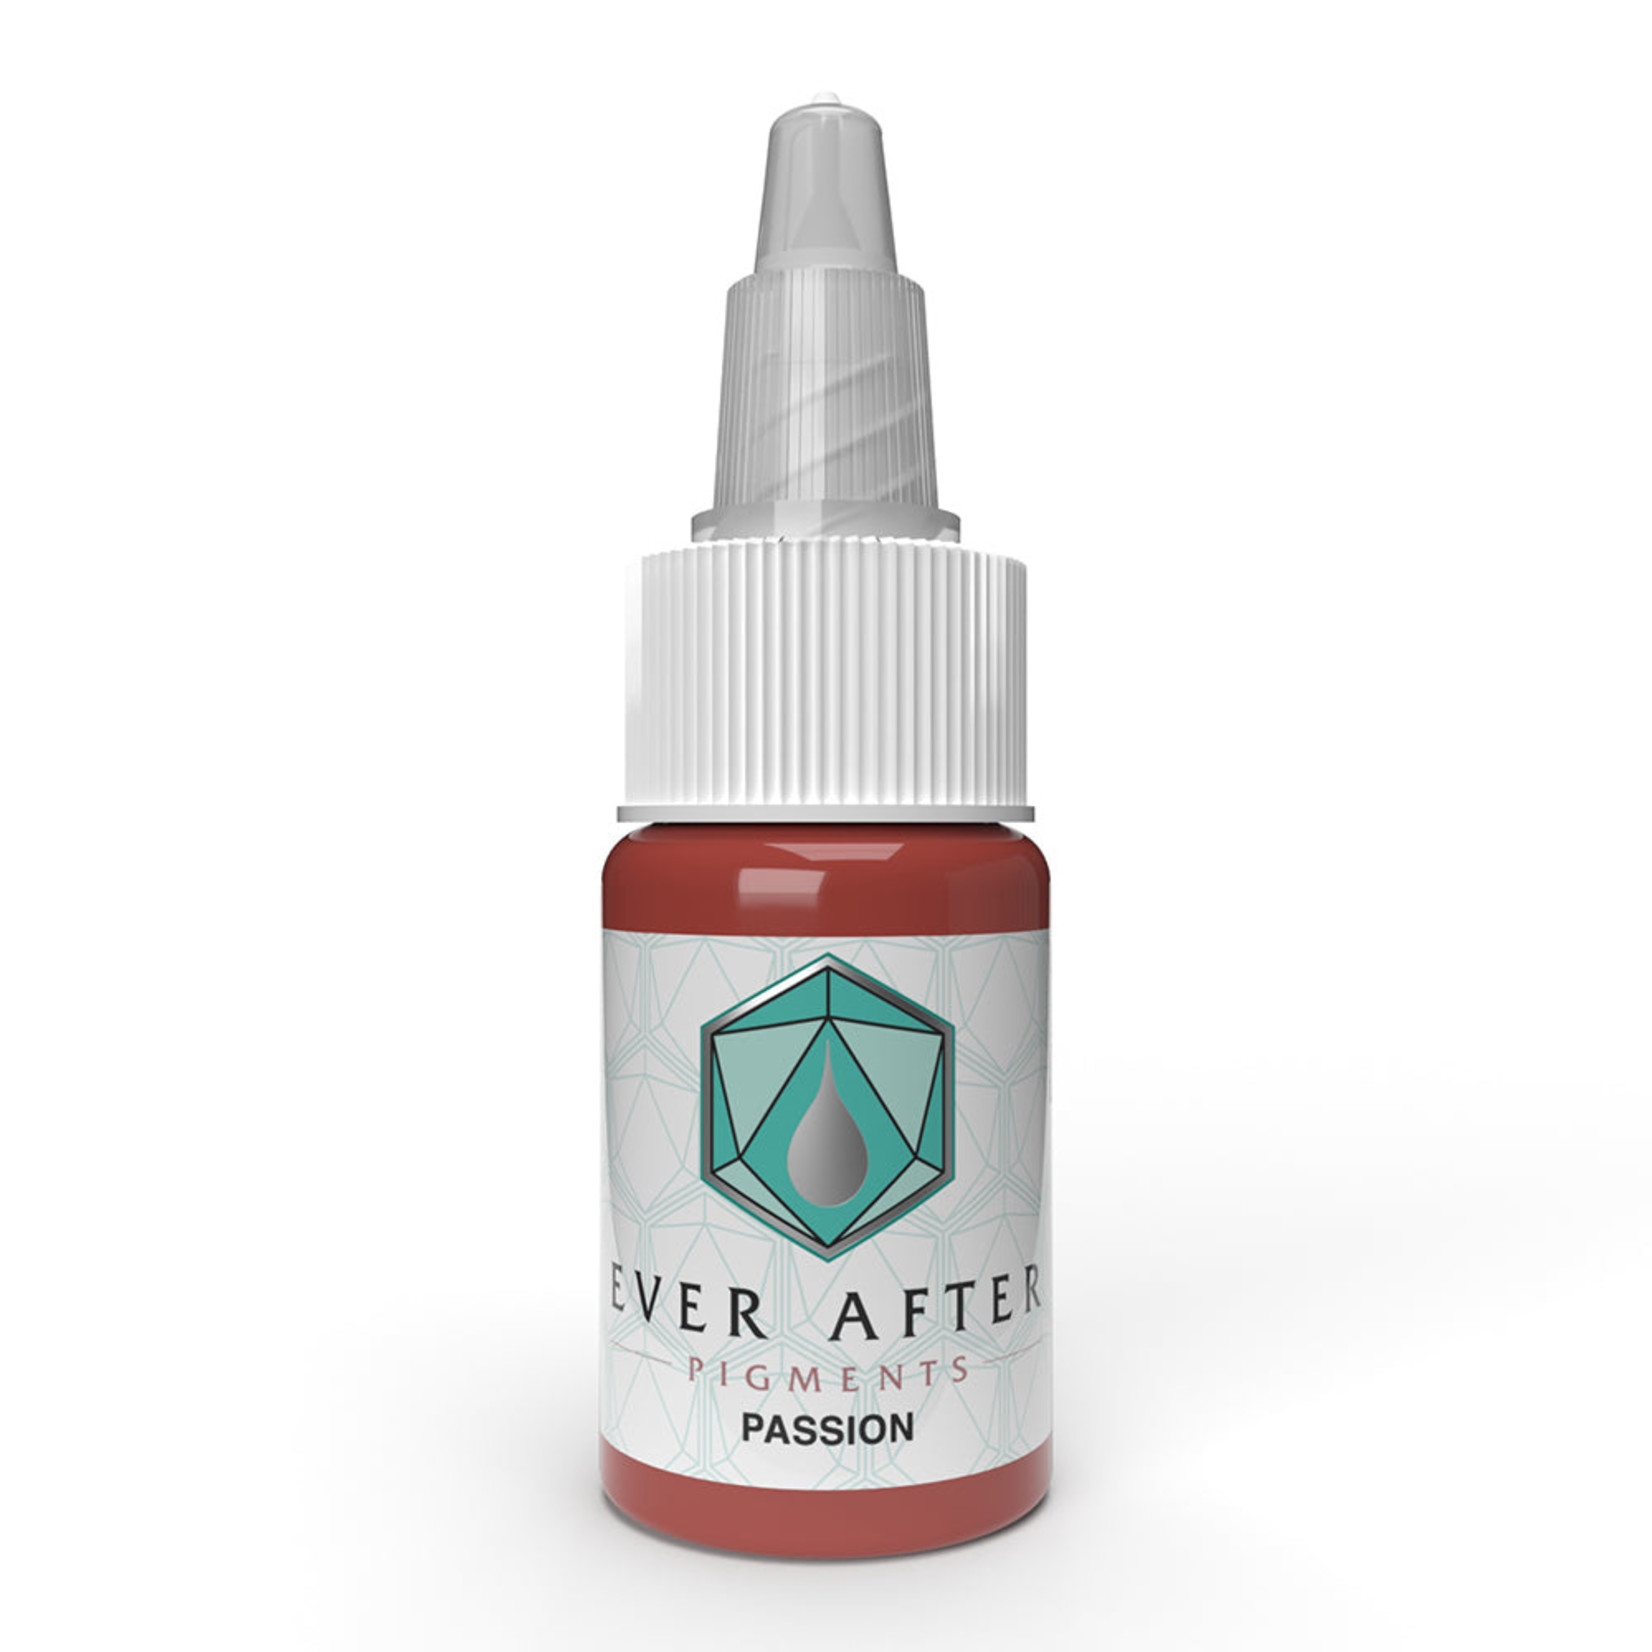 EVER AFTER PIGMENTS PASSION 0.5OZ